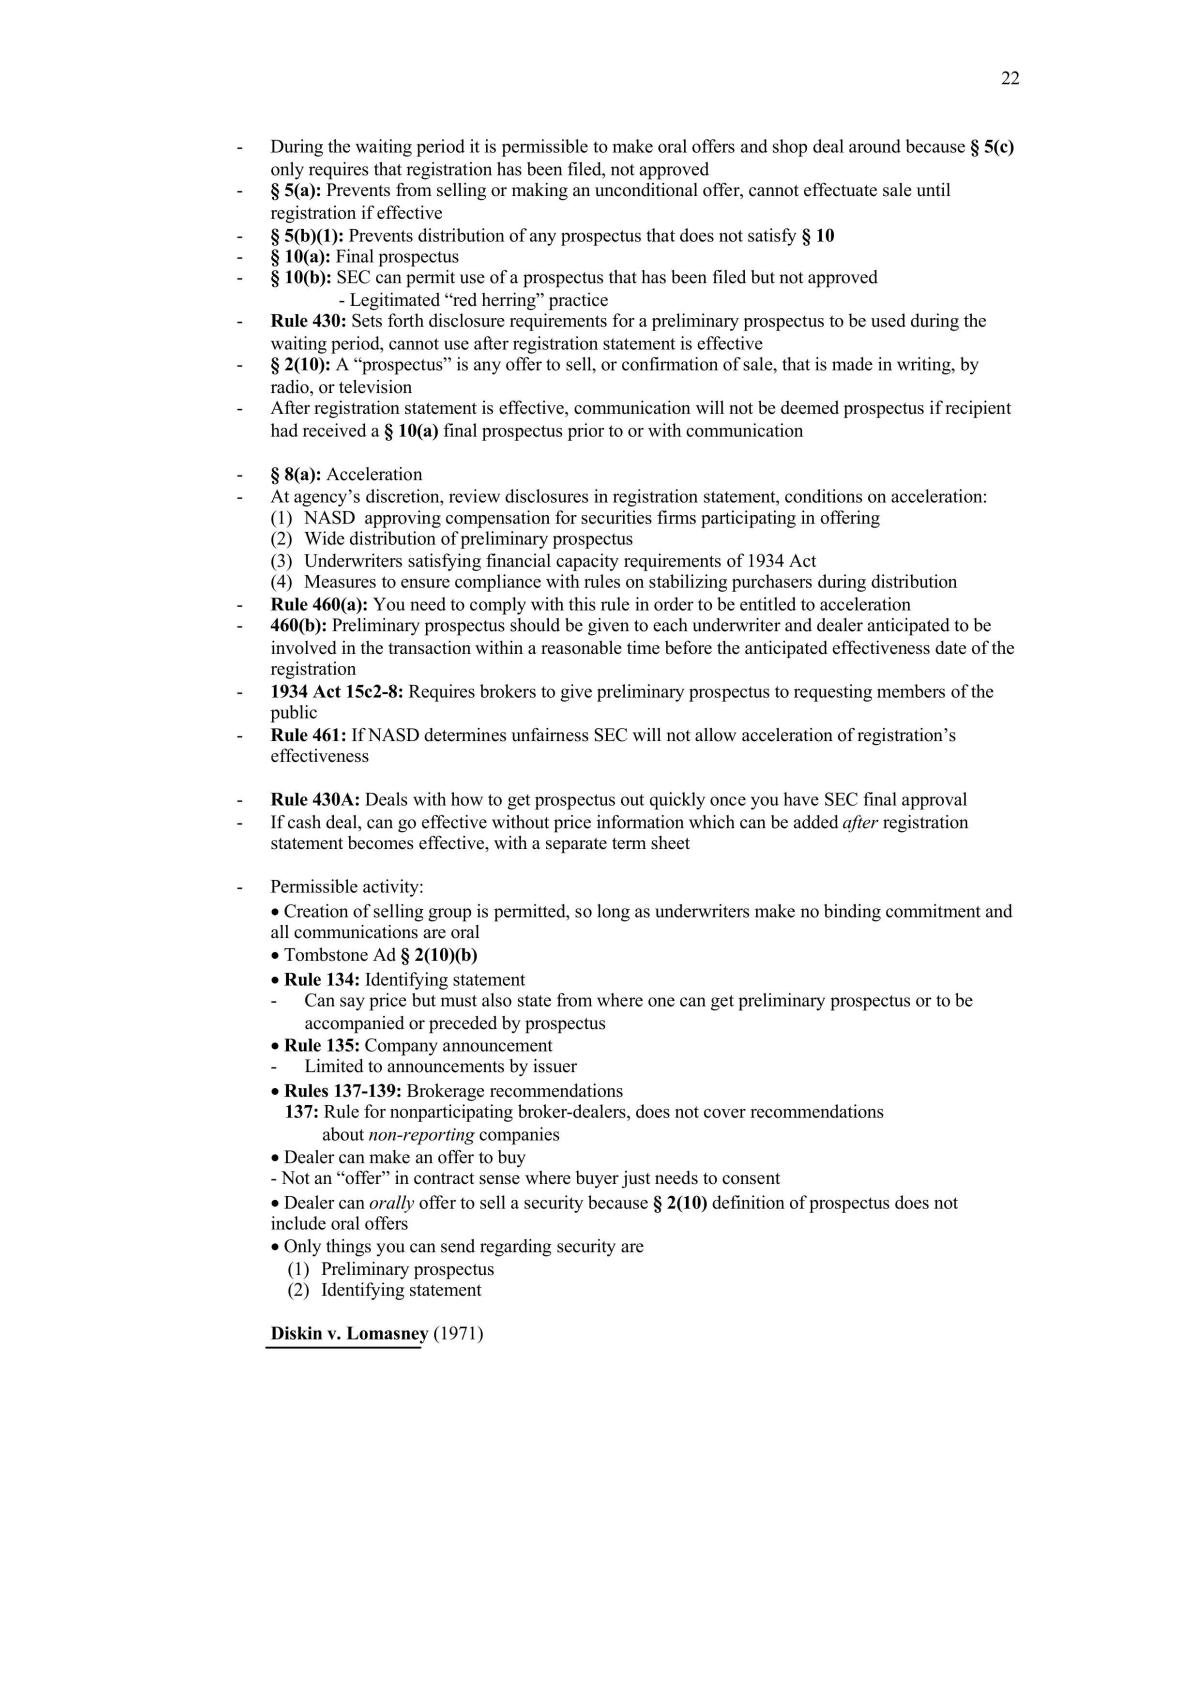 Securities Regulation Exam Outline - Page 22